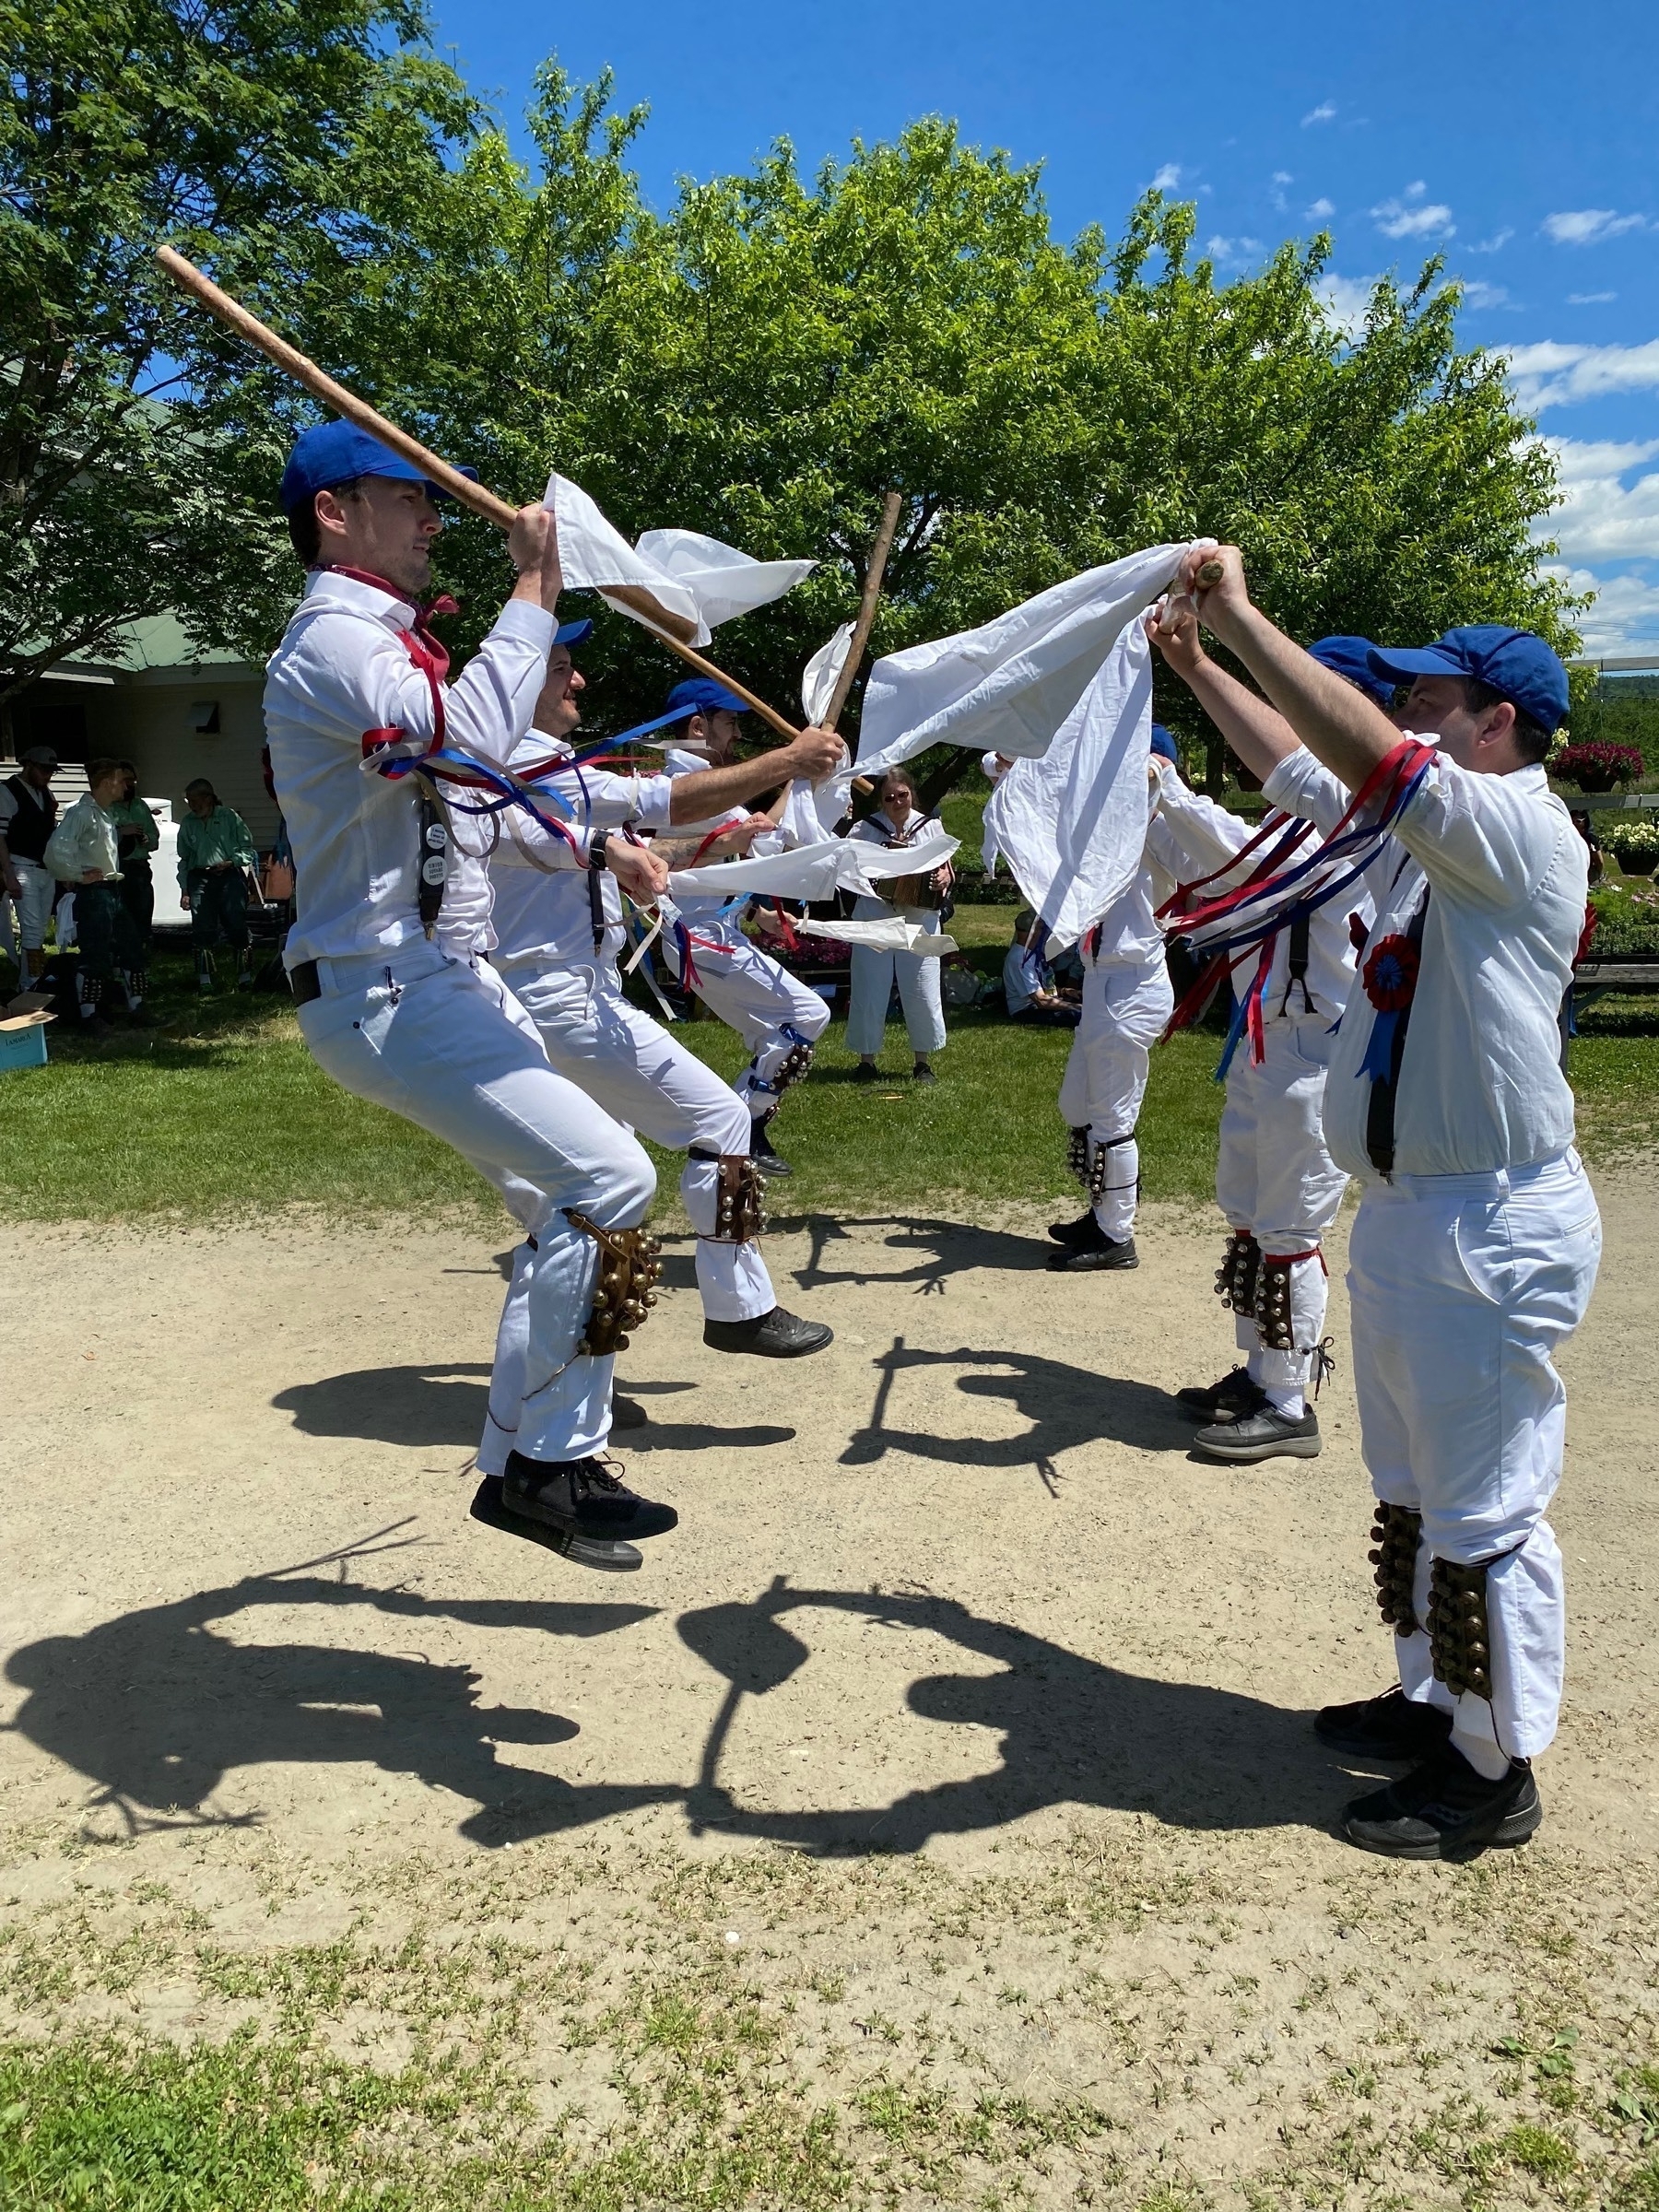 Morris dancers, one side leaping into the air to clash sticks being presented by the other side.